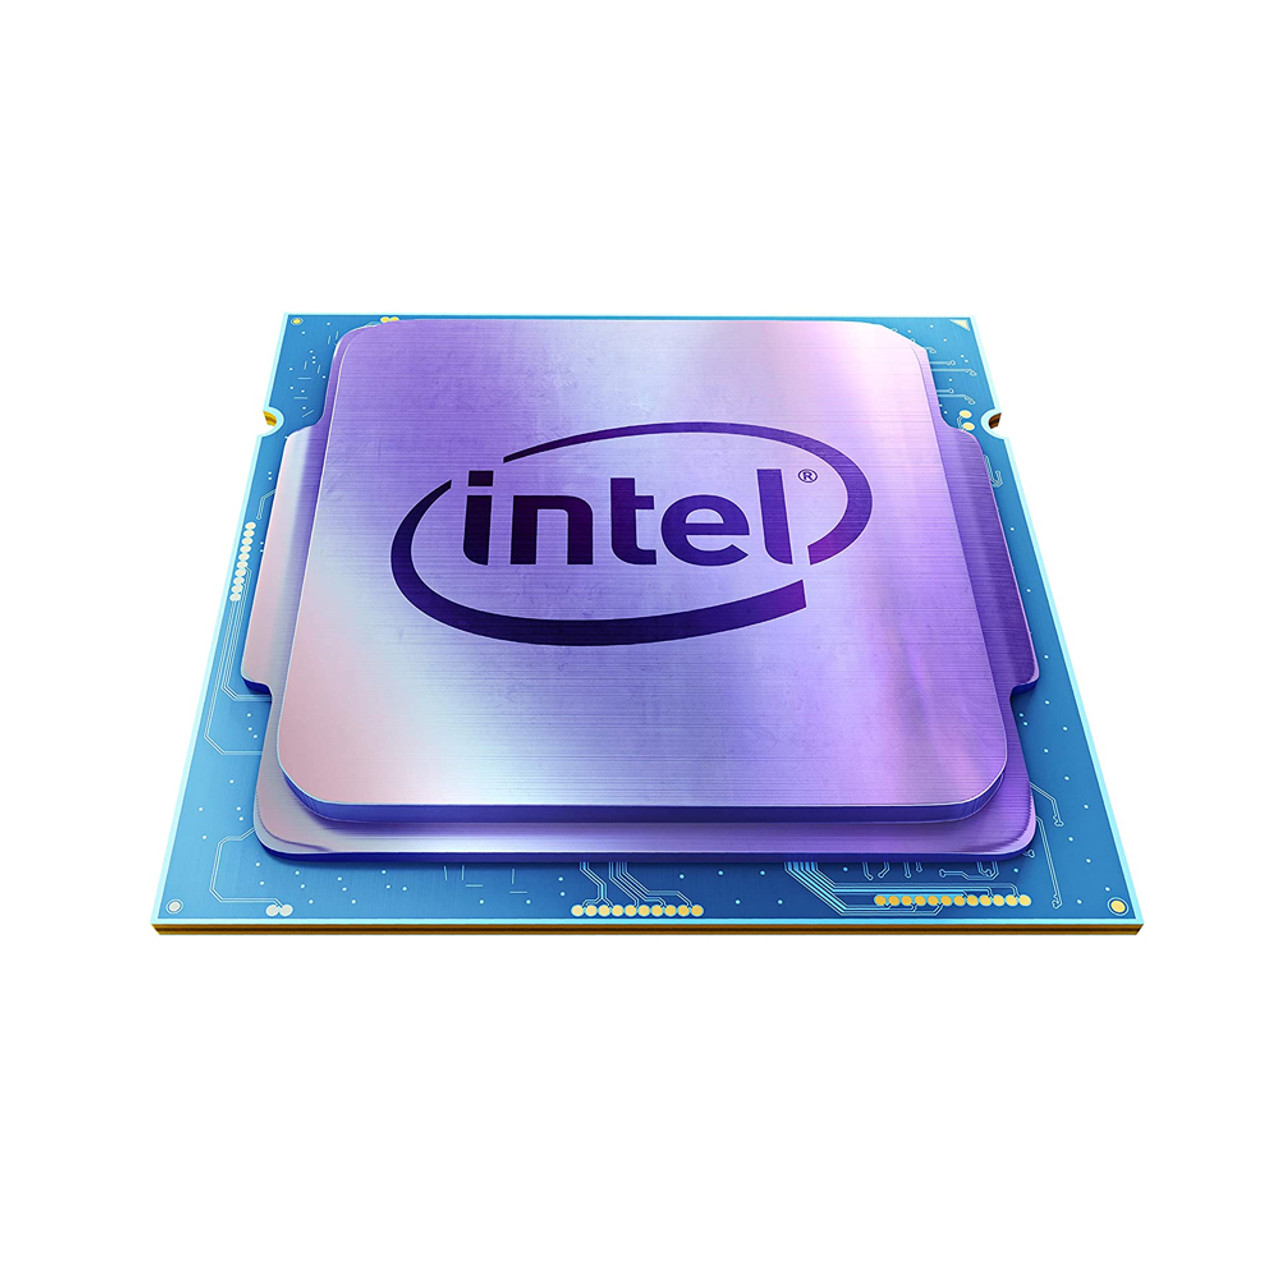 Intel Core i5-10400F Desktop CPU 6 Cores, up to 4.3GHz, 65W BX8070110400F  735858445948